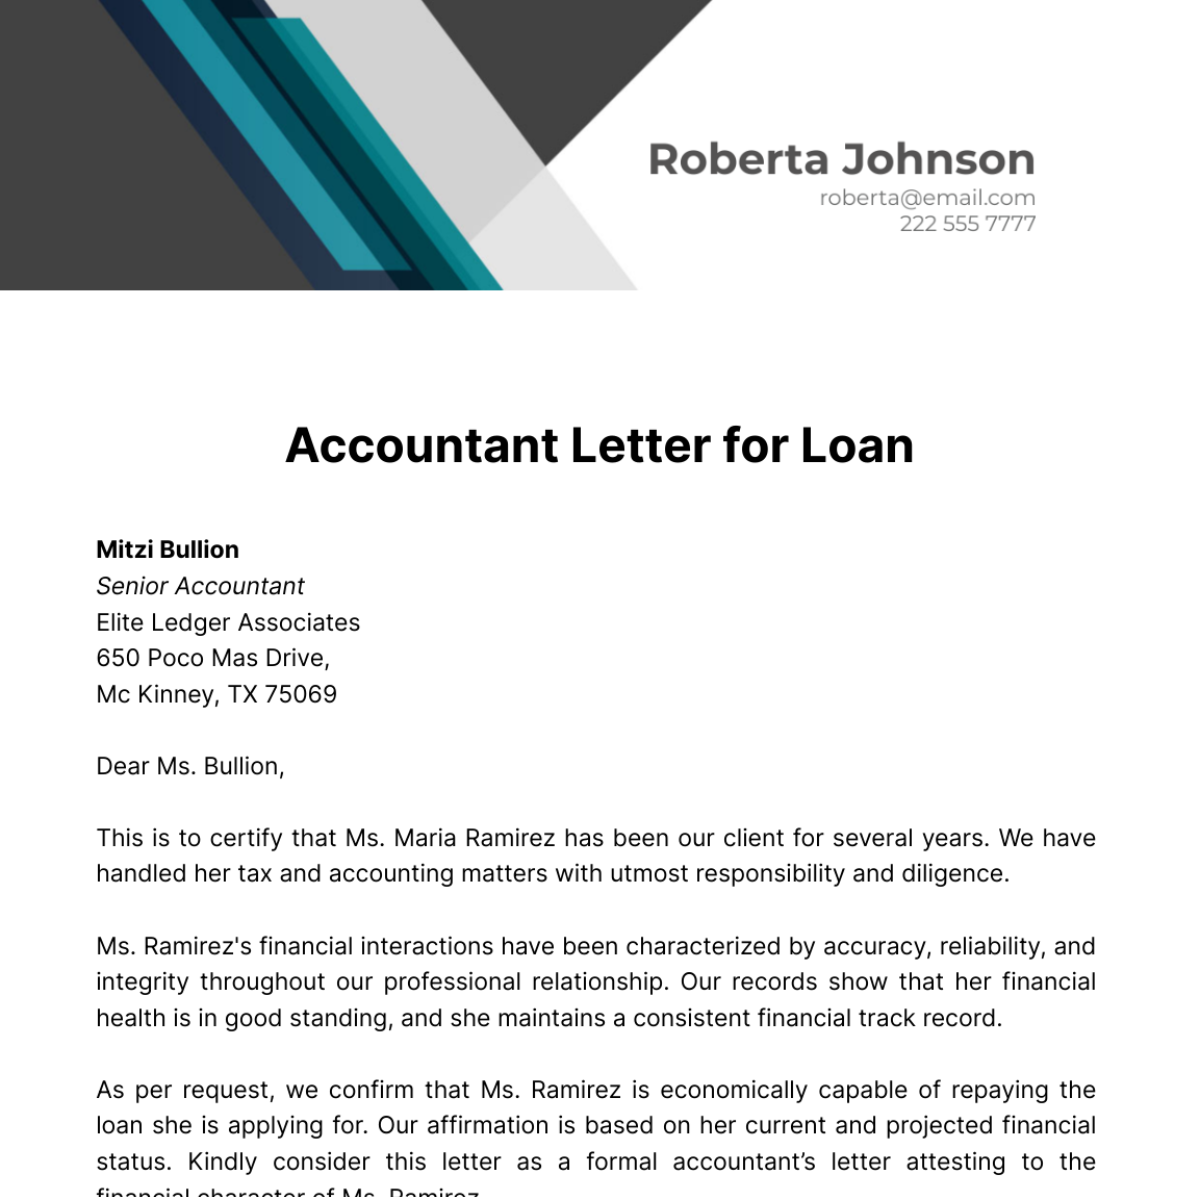 Accountant Letter for Loan Template